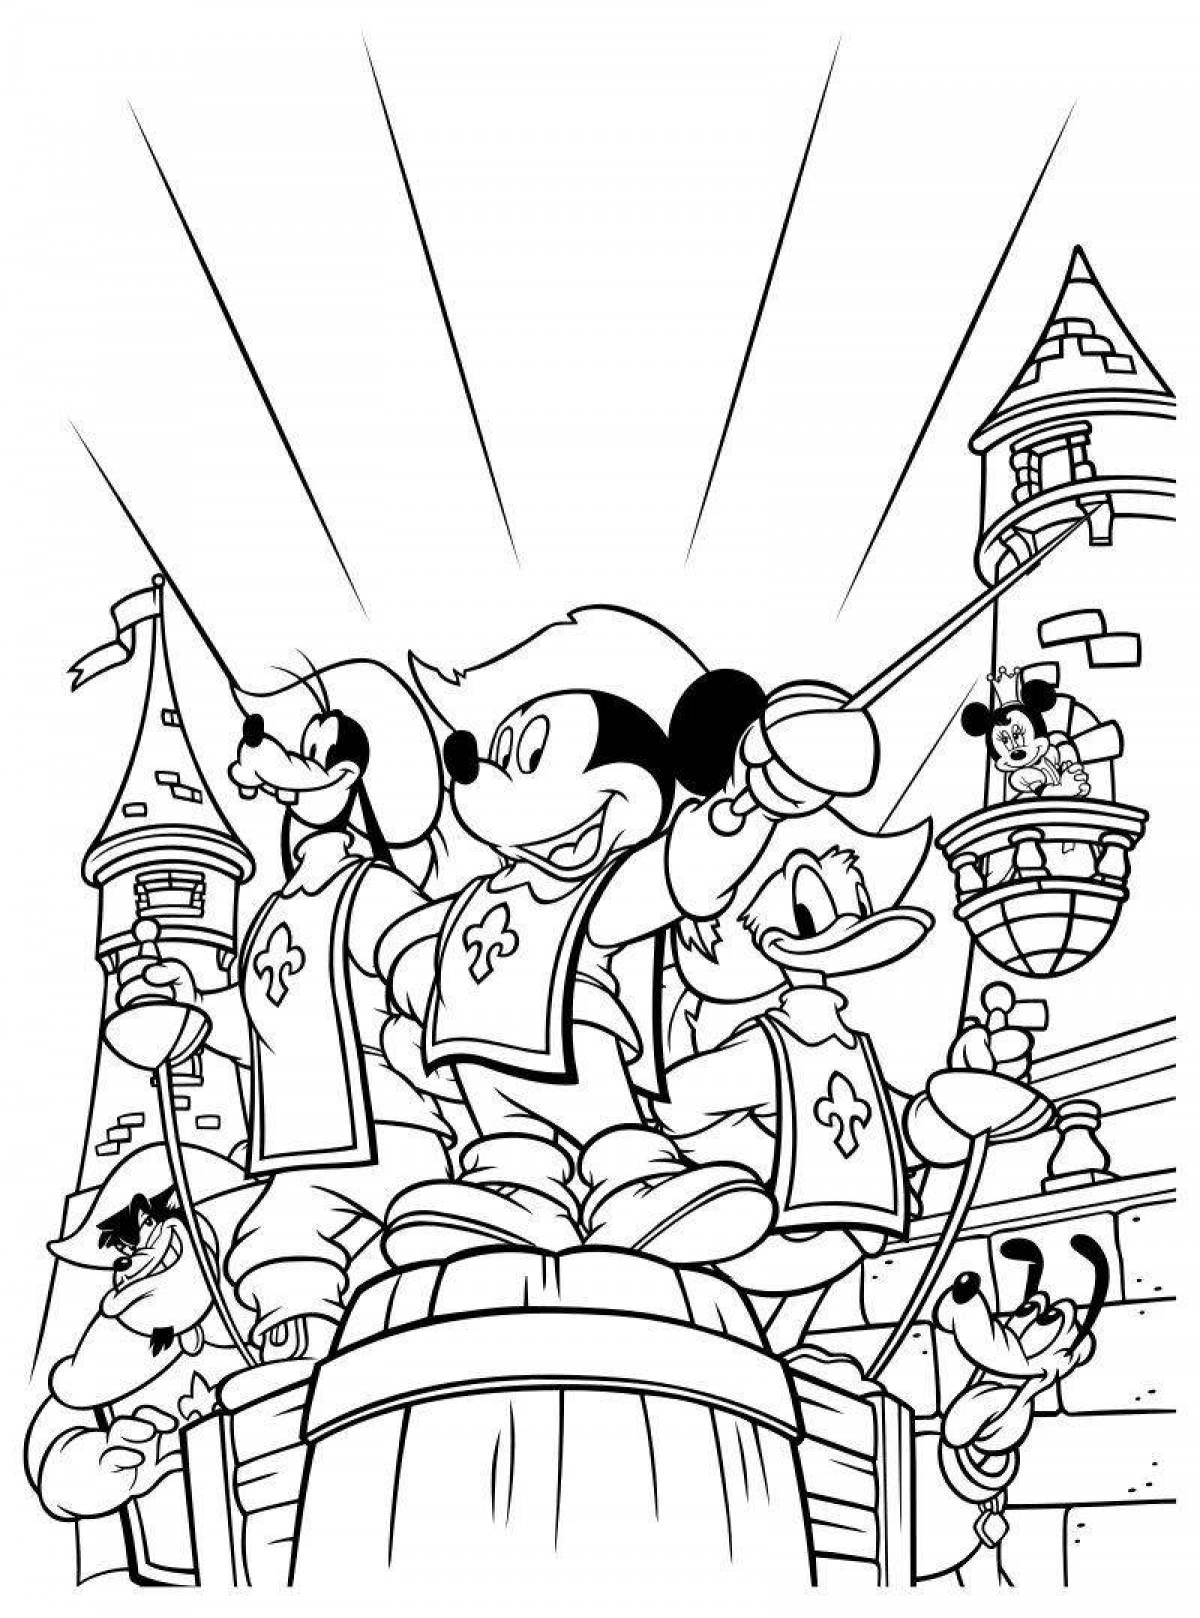 Coloring page vibrant musketeers